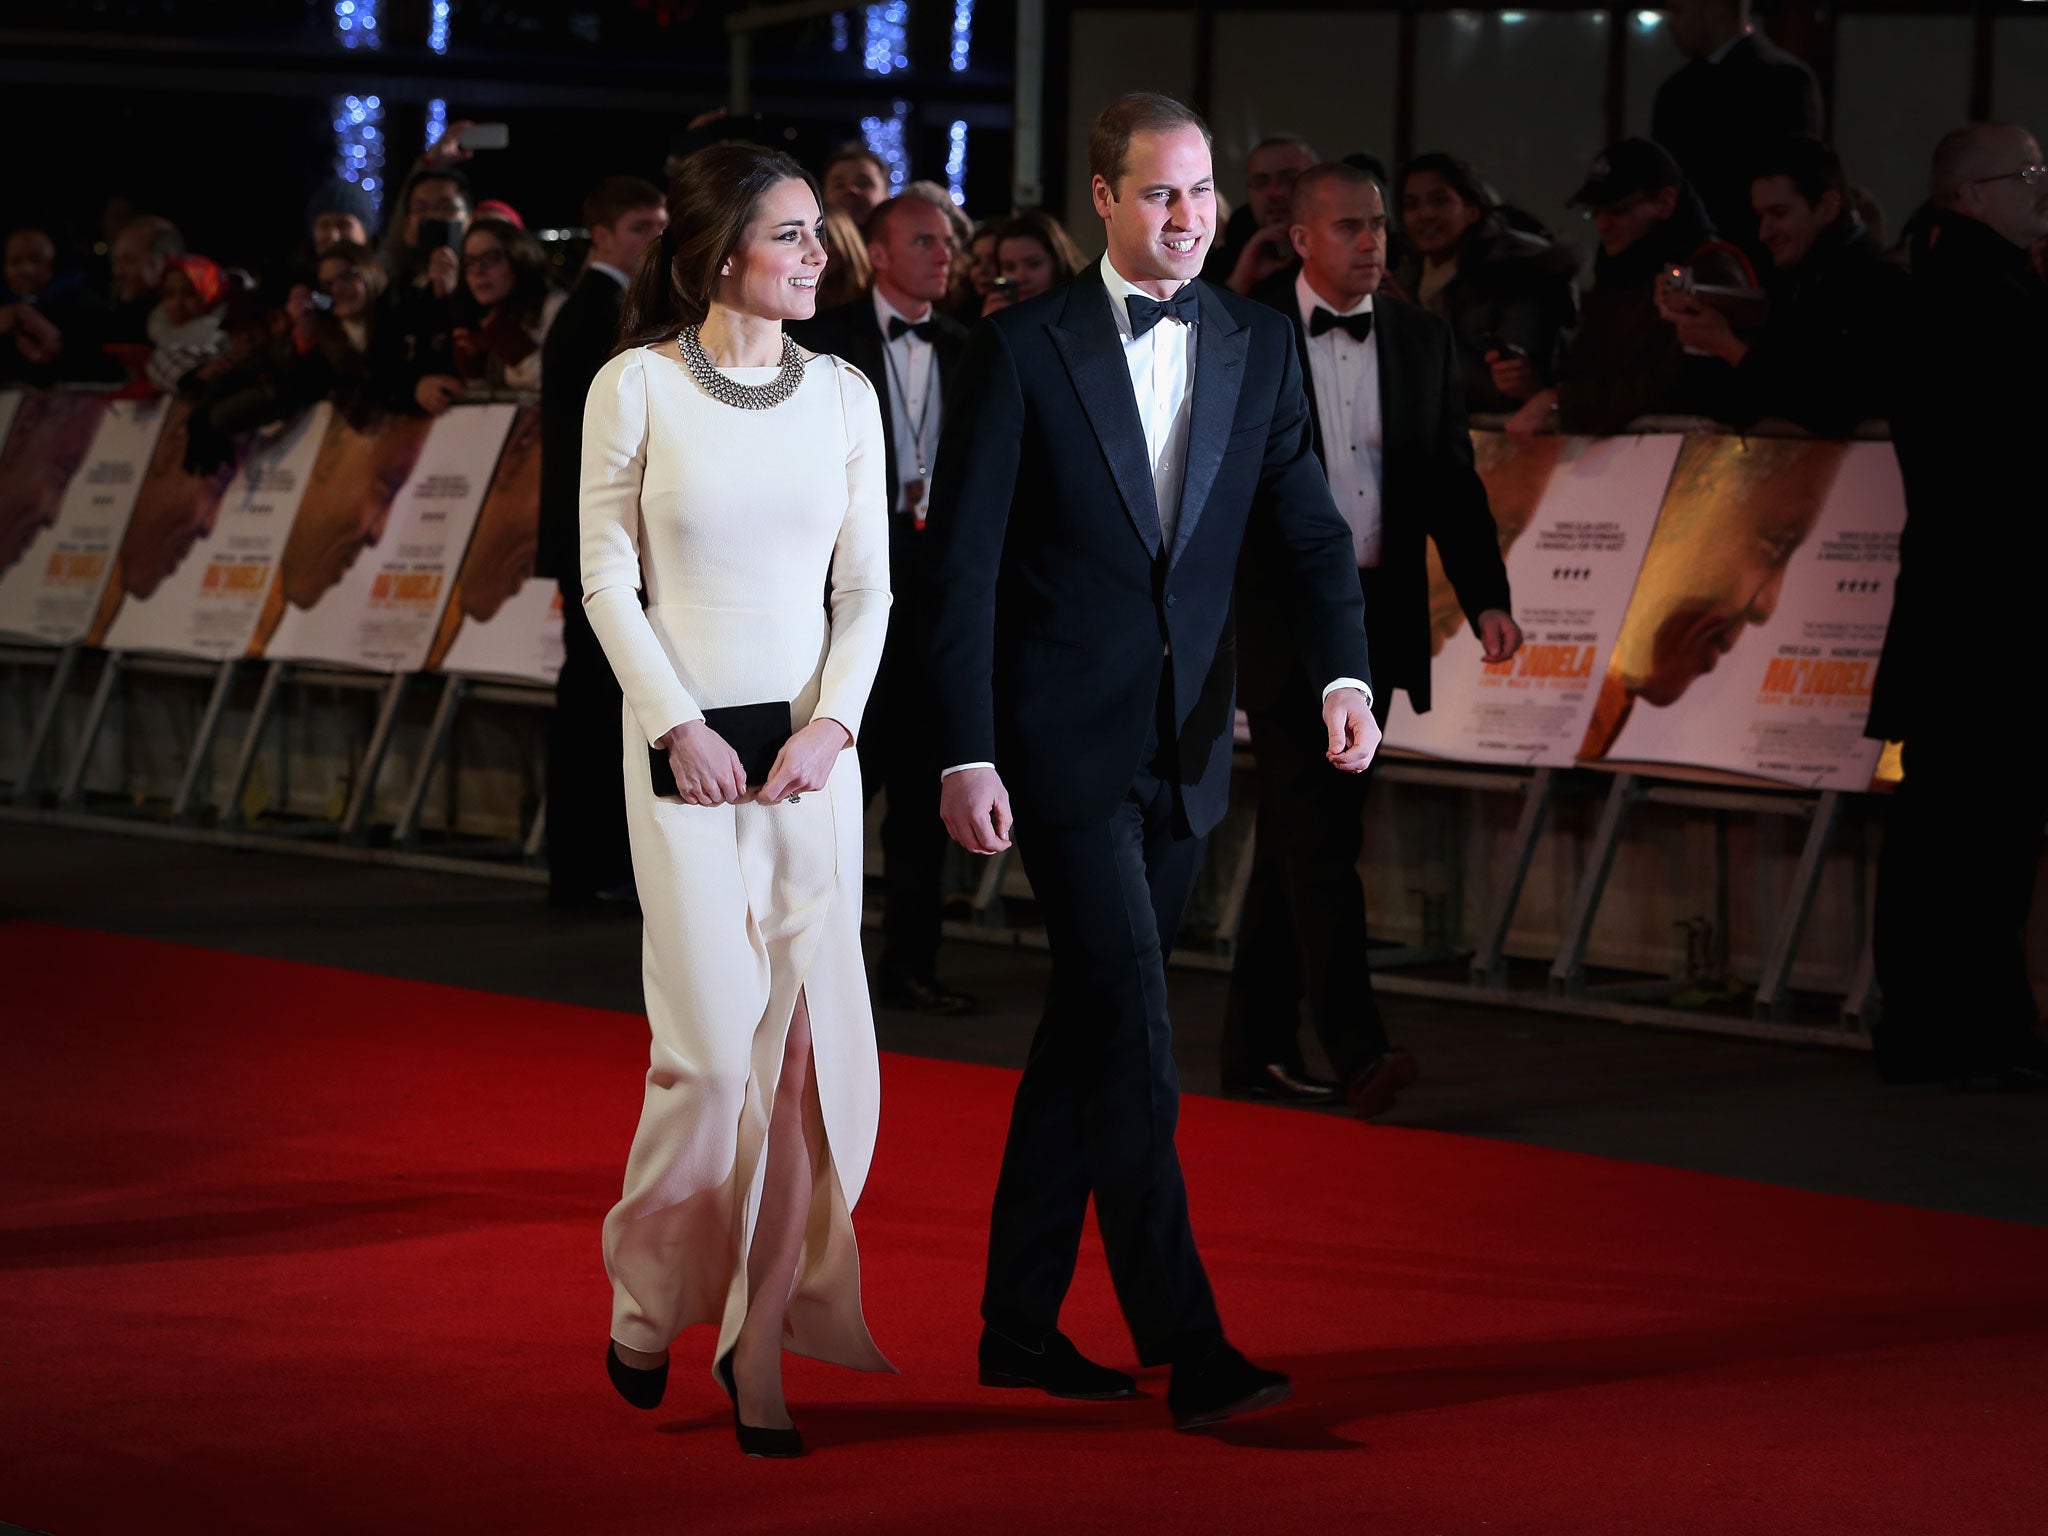 The Duke and Duchess of Cambridge were watching a film premiere about the life of Nelson Mandela when news of the former South African president's death broke.